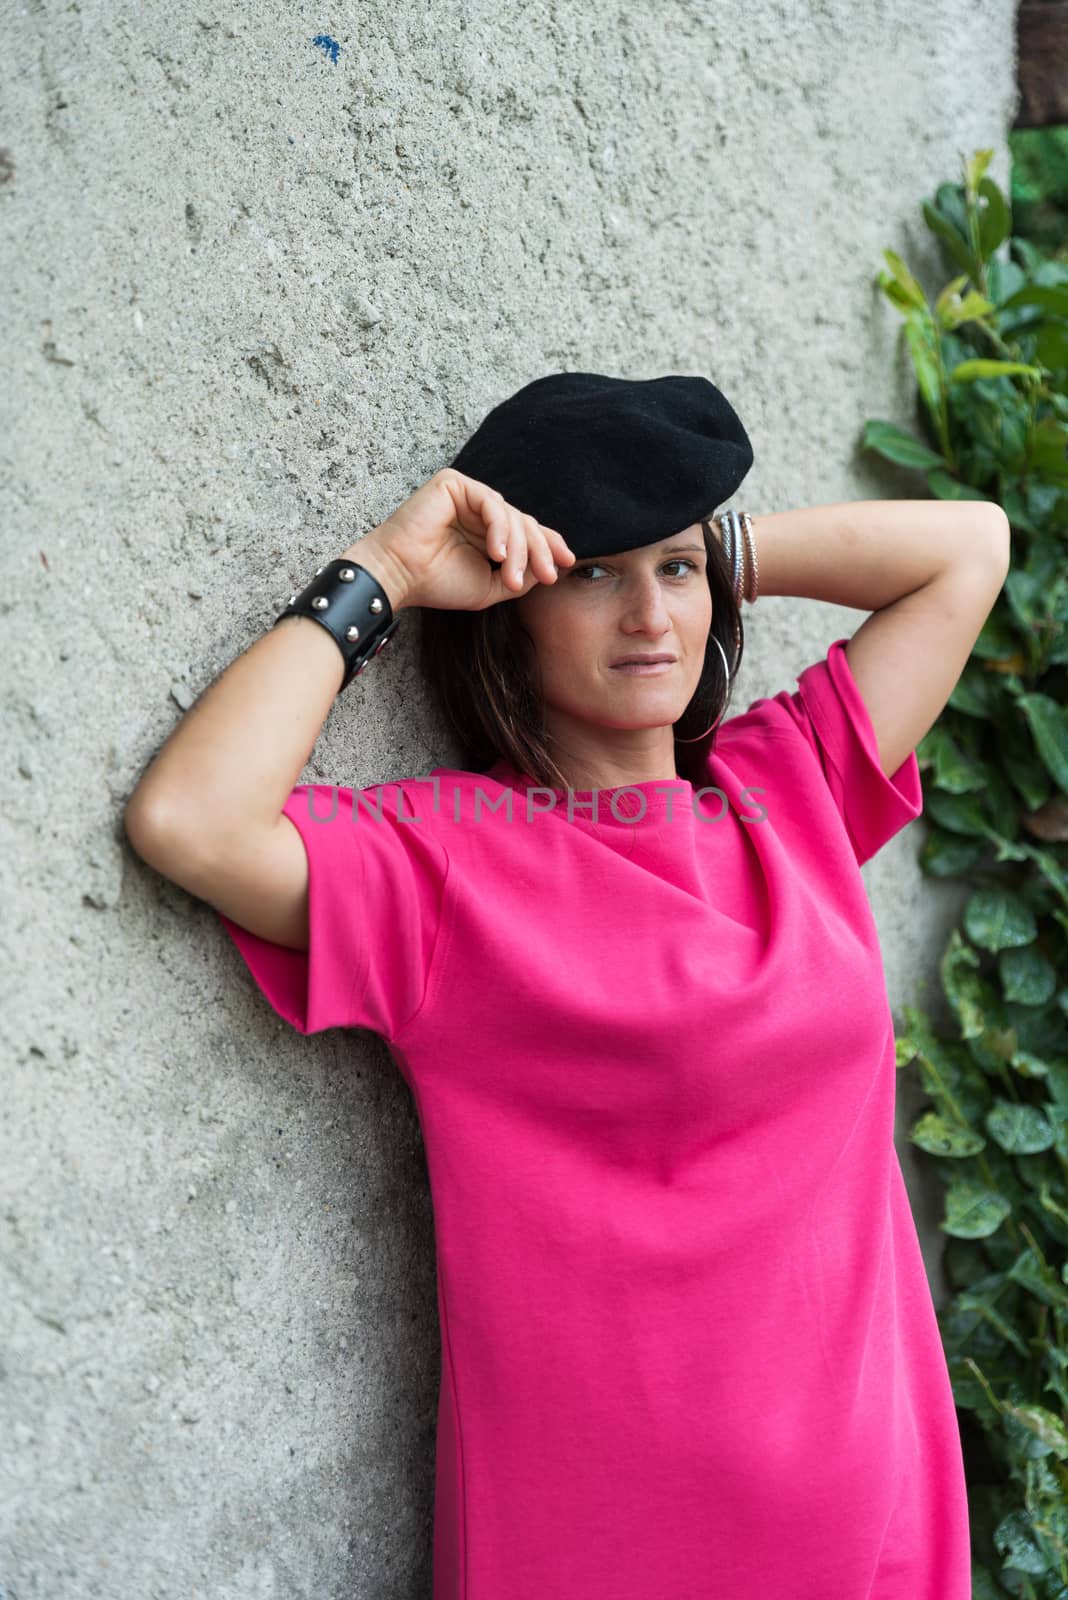 girl with dark hair posing wearing a black beret and a fuchsia dress and a bracelet, image of a woman posing in front of a light wall